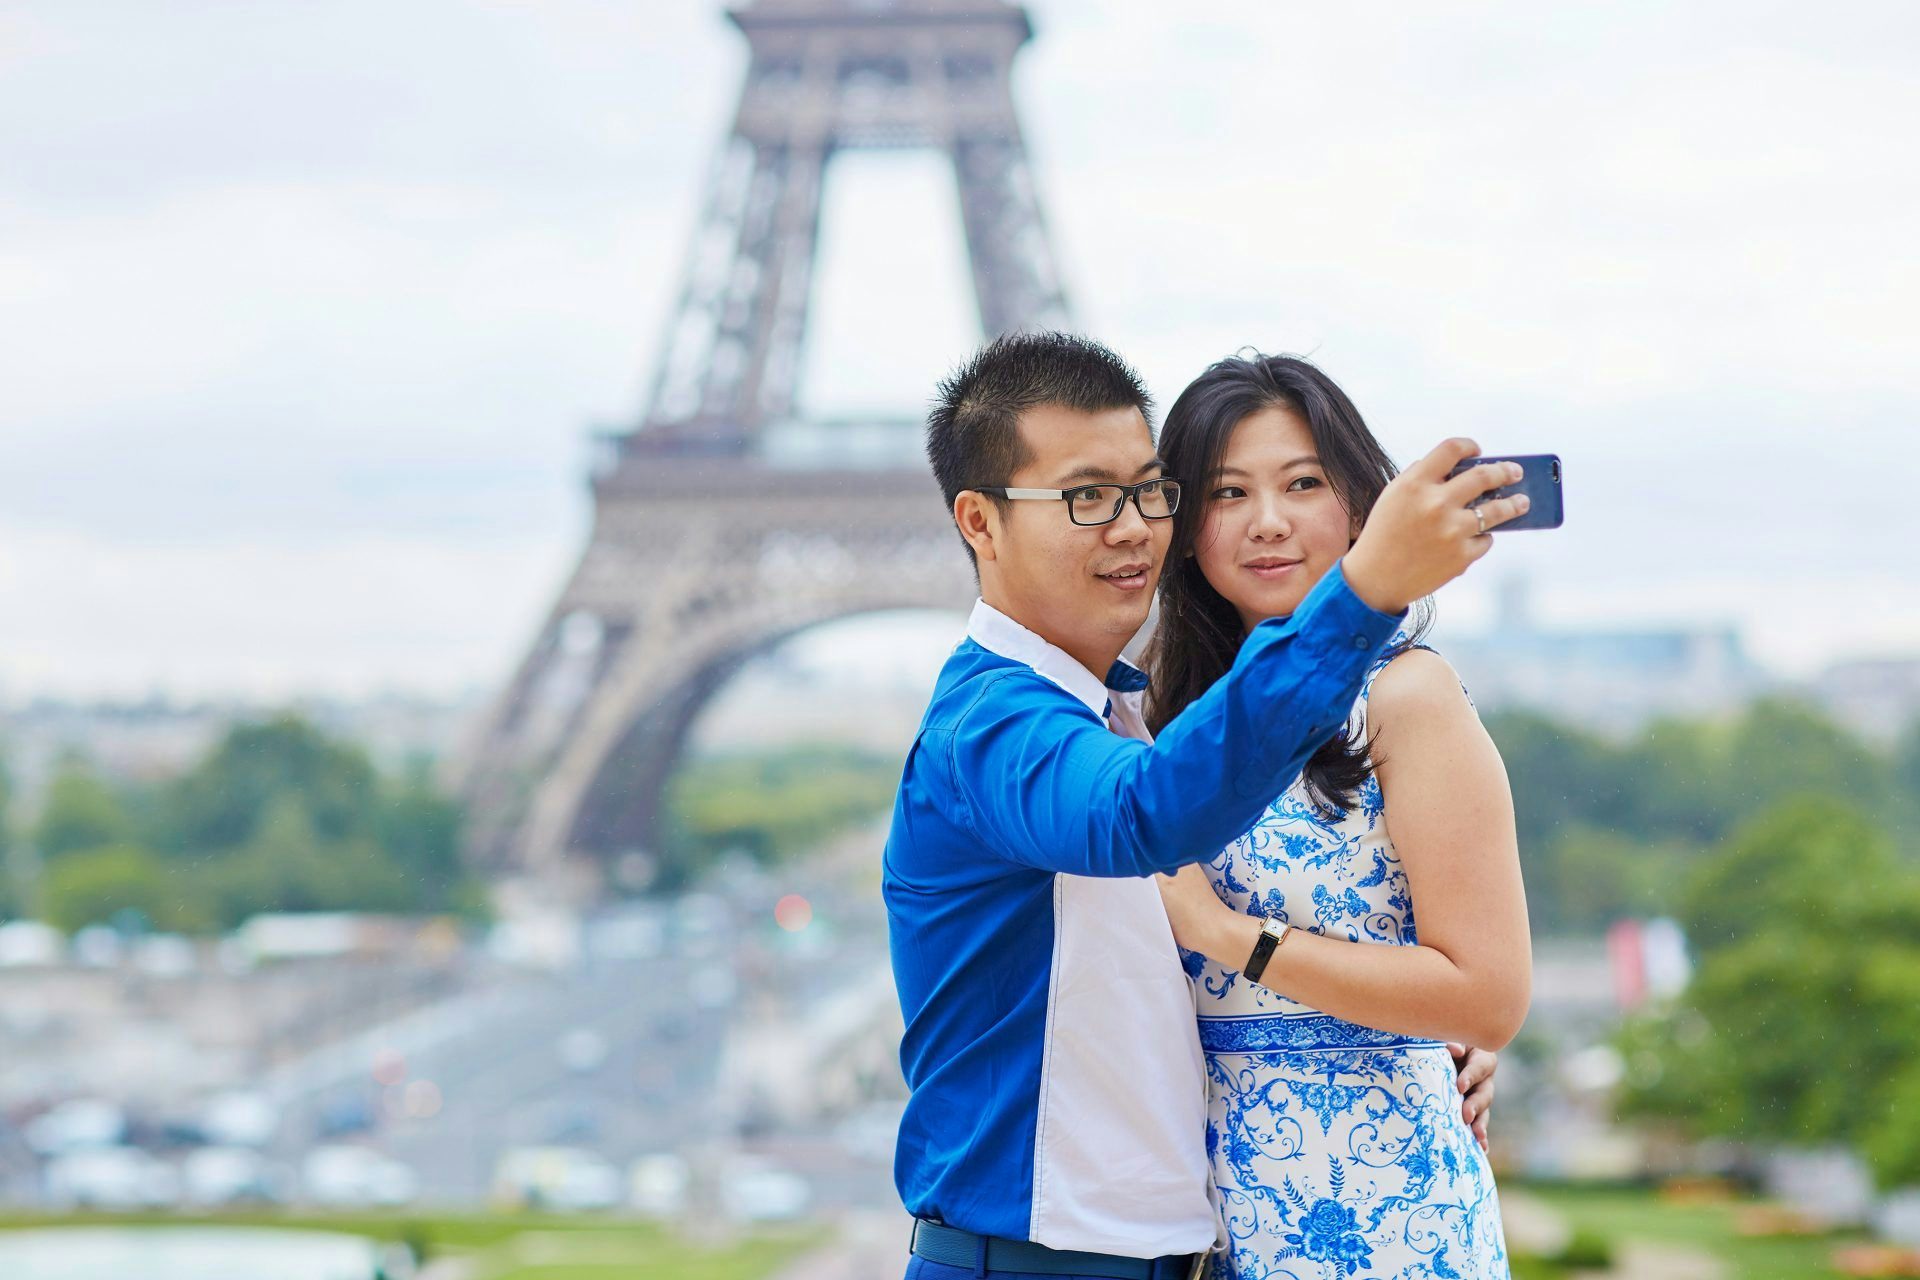 Chinese Tourists Return to Paris Amid Easing Fears of Terrorism